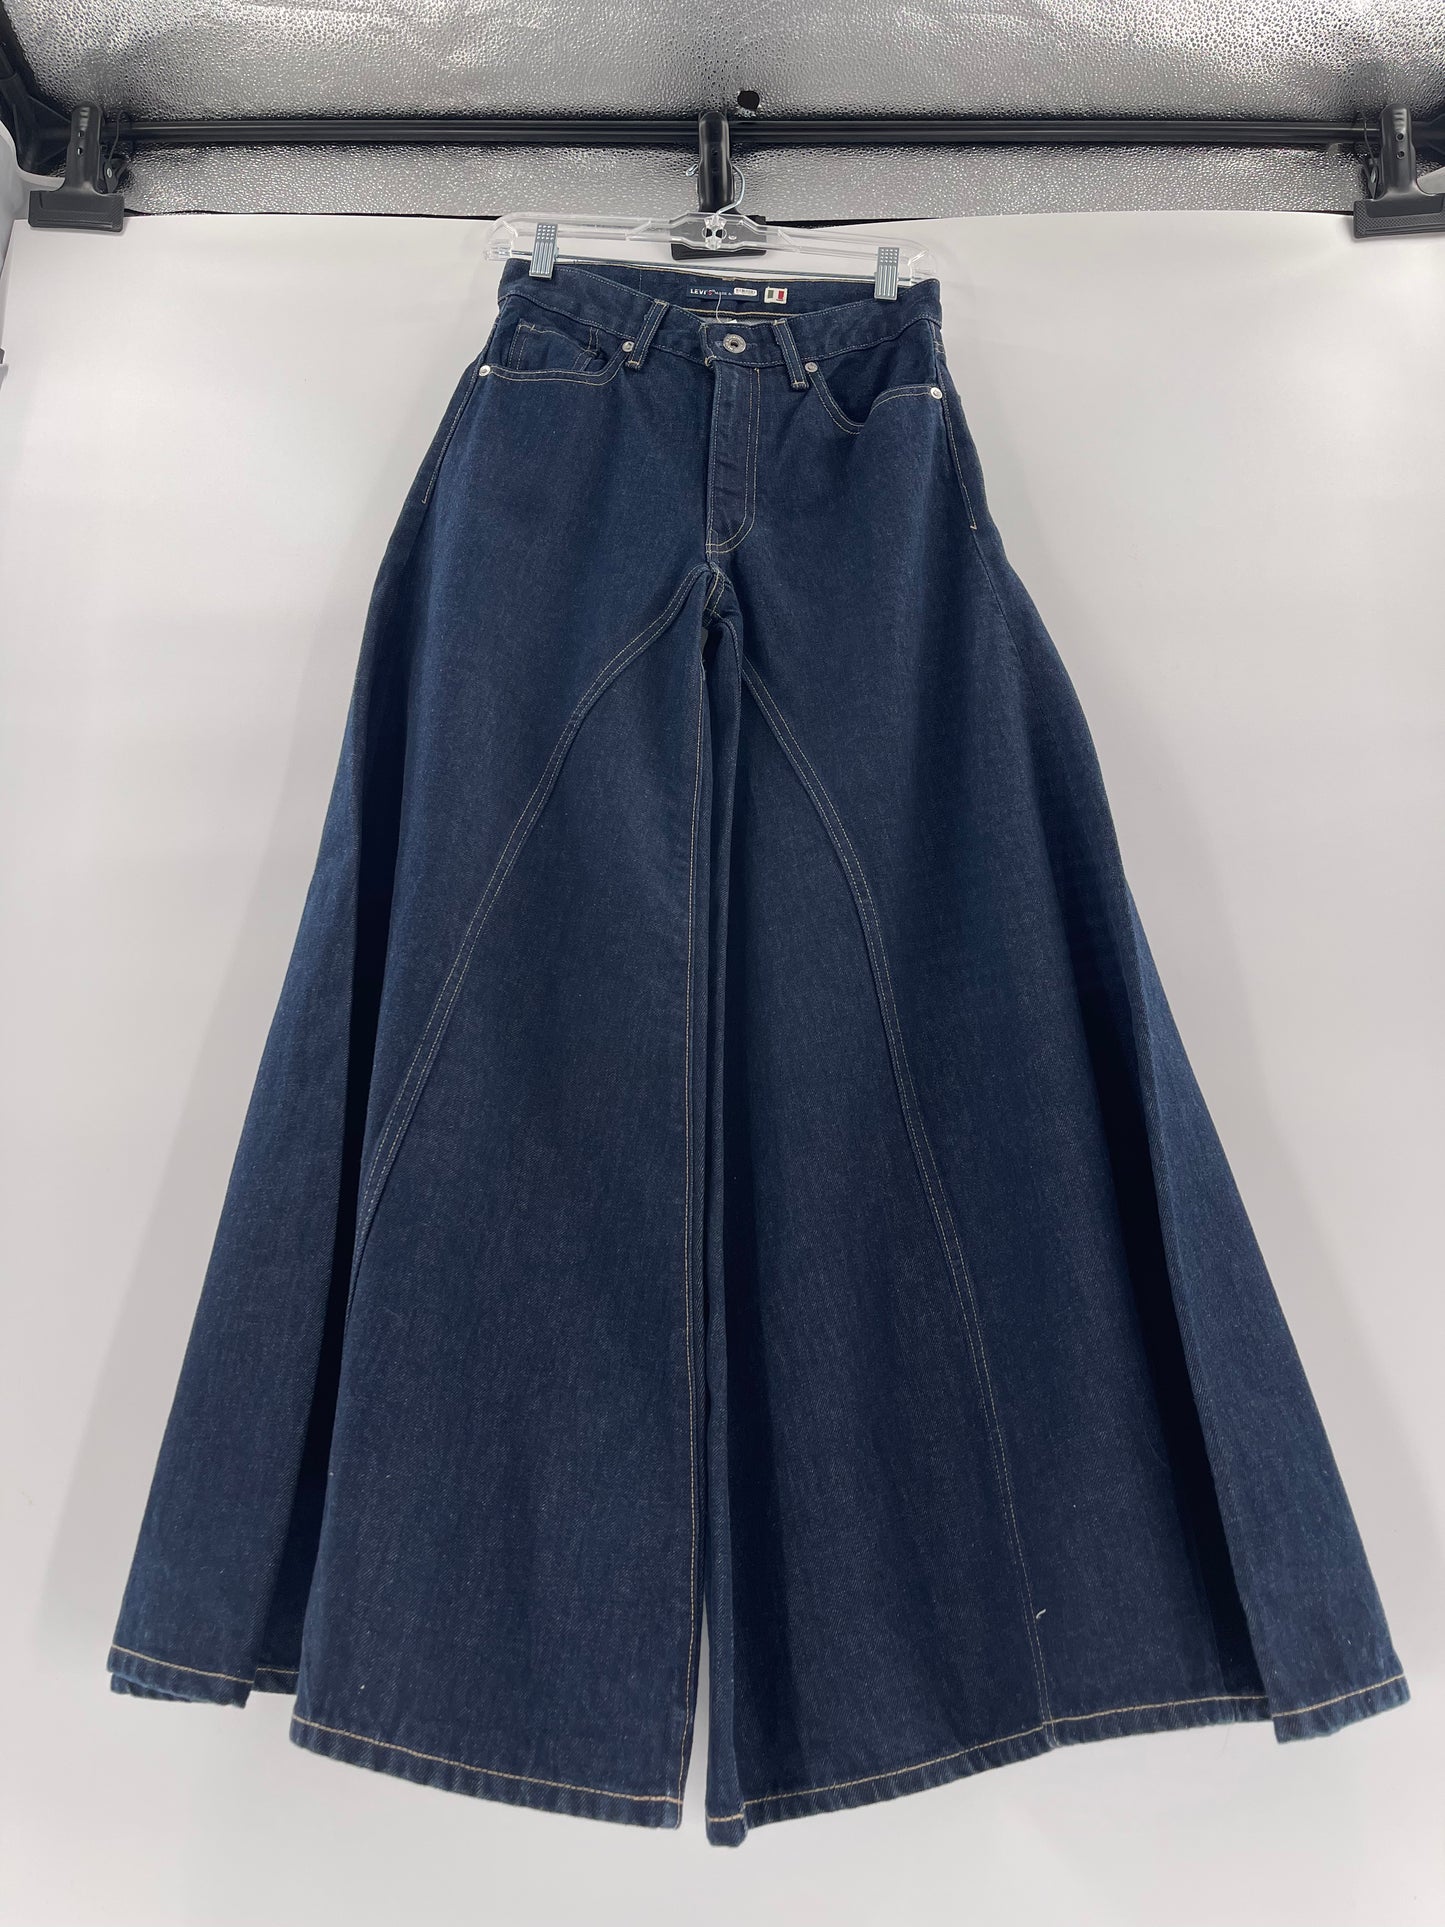 Free People x LEVI outrageous flare (Sz 25)